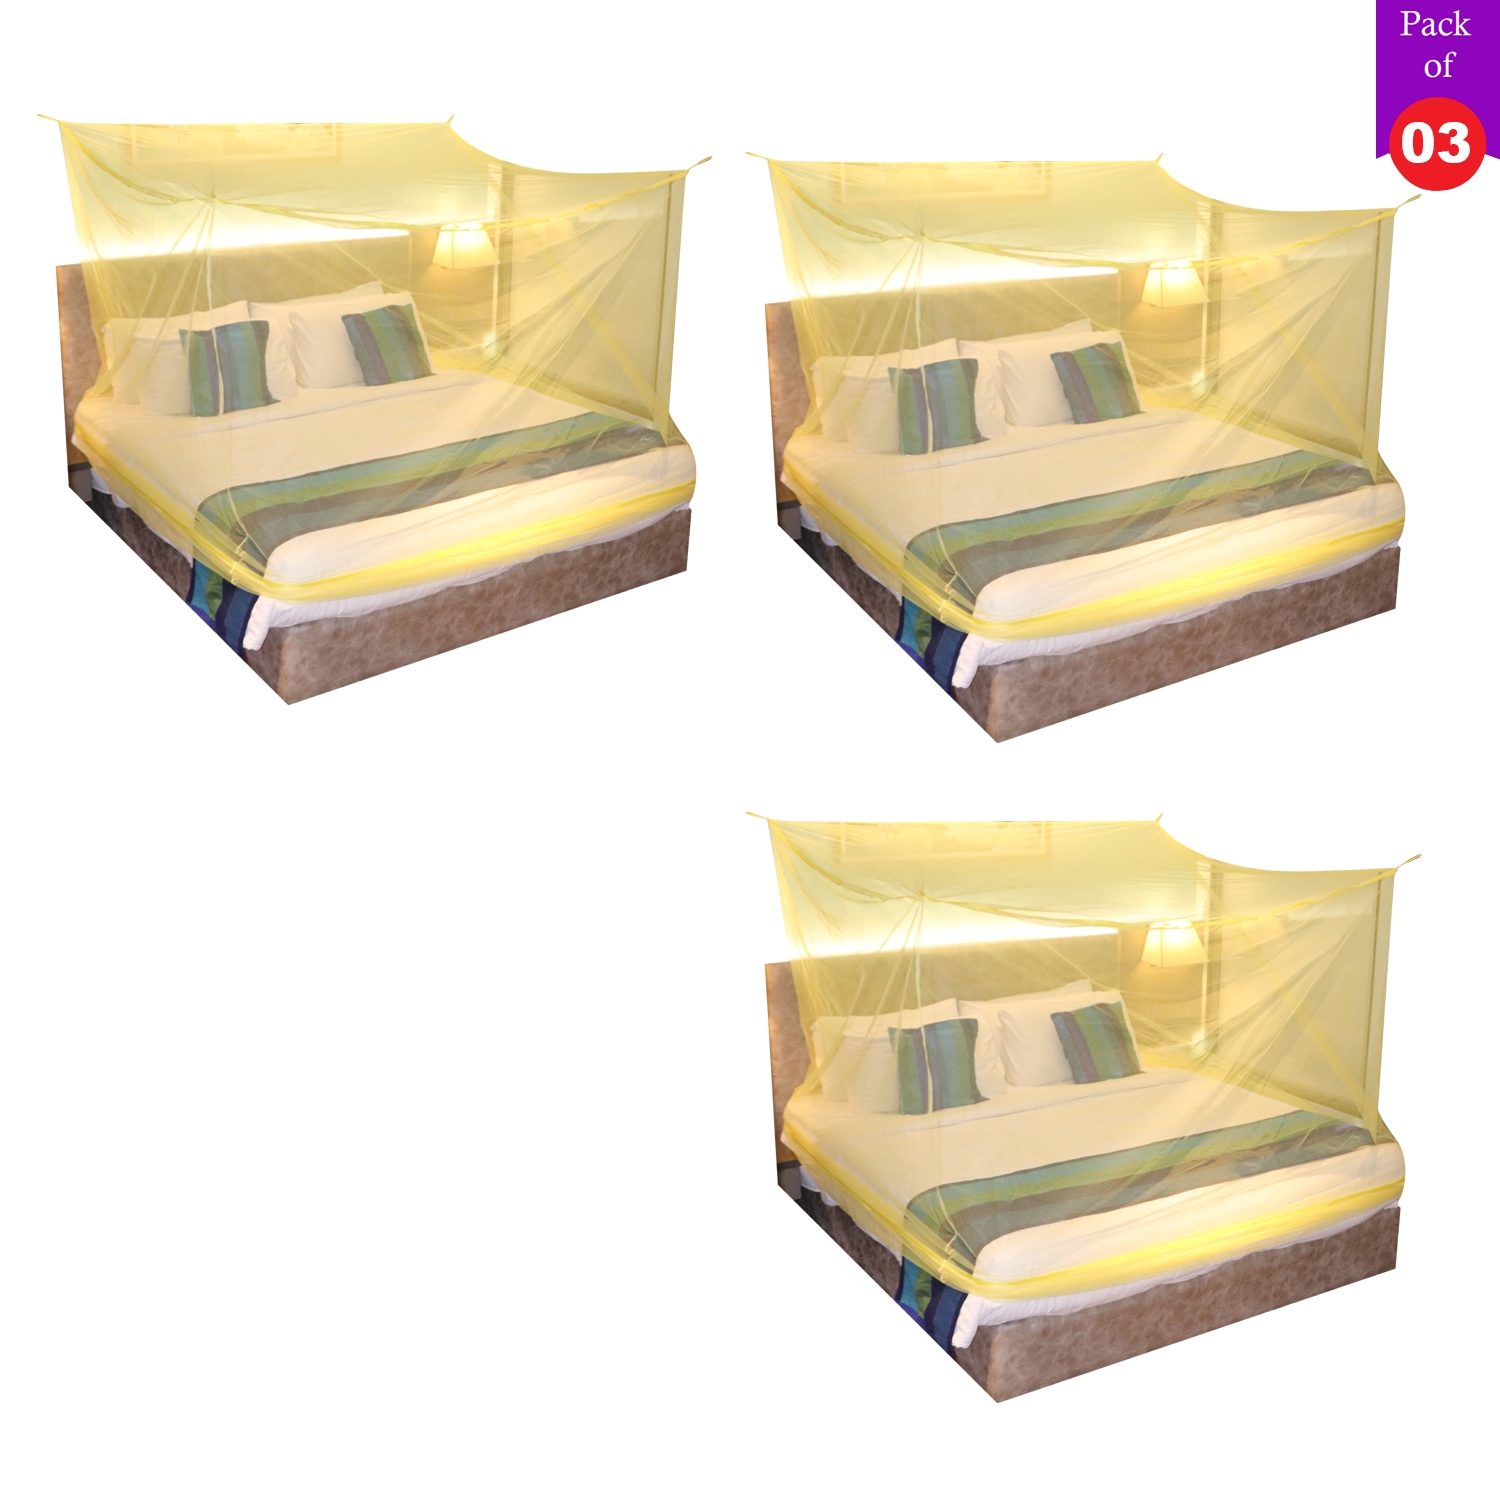 Paola Jewels | Mosquito Net for Double Bed, King-Size, Square Hanging Foldable Polyester Net YellowPack of 3 2